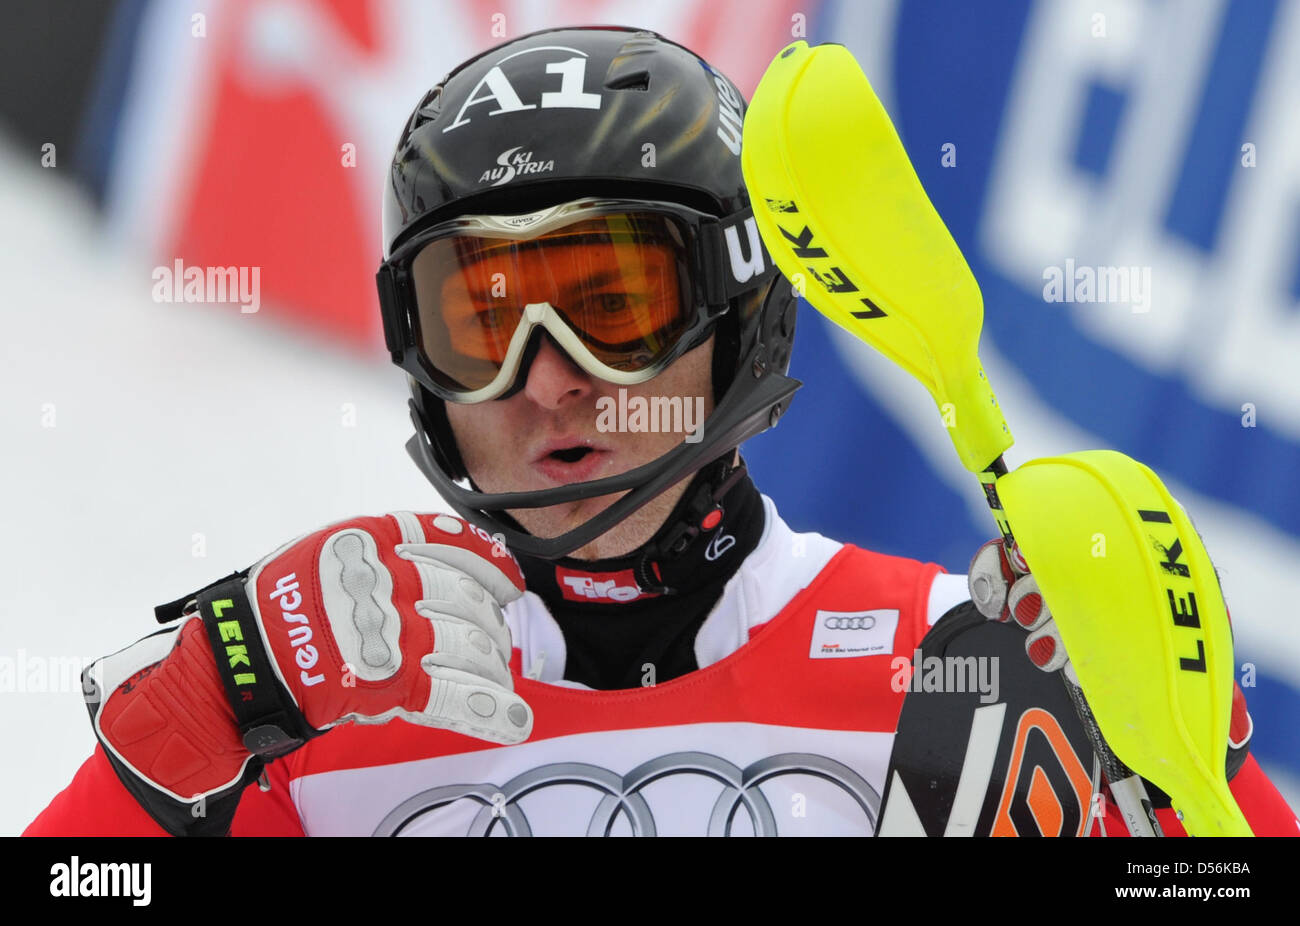 Austria's Reinfried Herbst cheers at the finish line during World Cup Finale in Slalom in Garmisch-Partenkirchen, Germany, 13 March 2010. Photo: PETER KNEFFEL Stock Photo